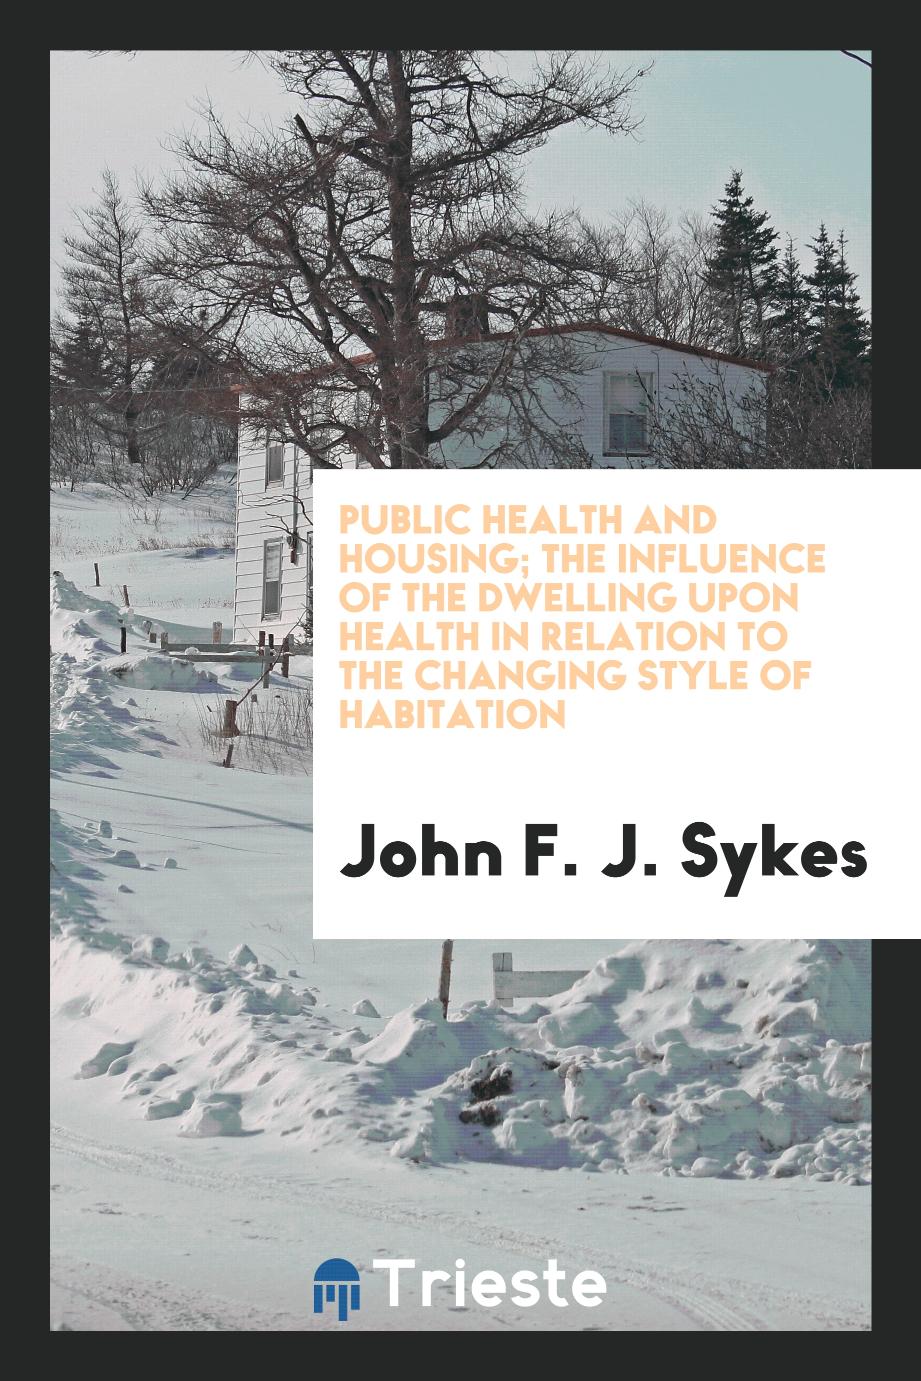 Public health and housing; the influence of the dwelling upon health in relation to the changing style of habitation